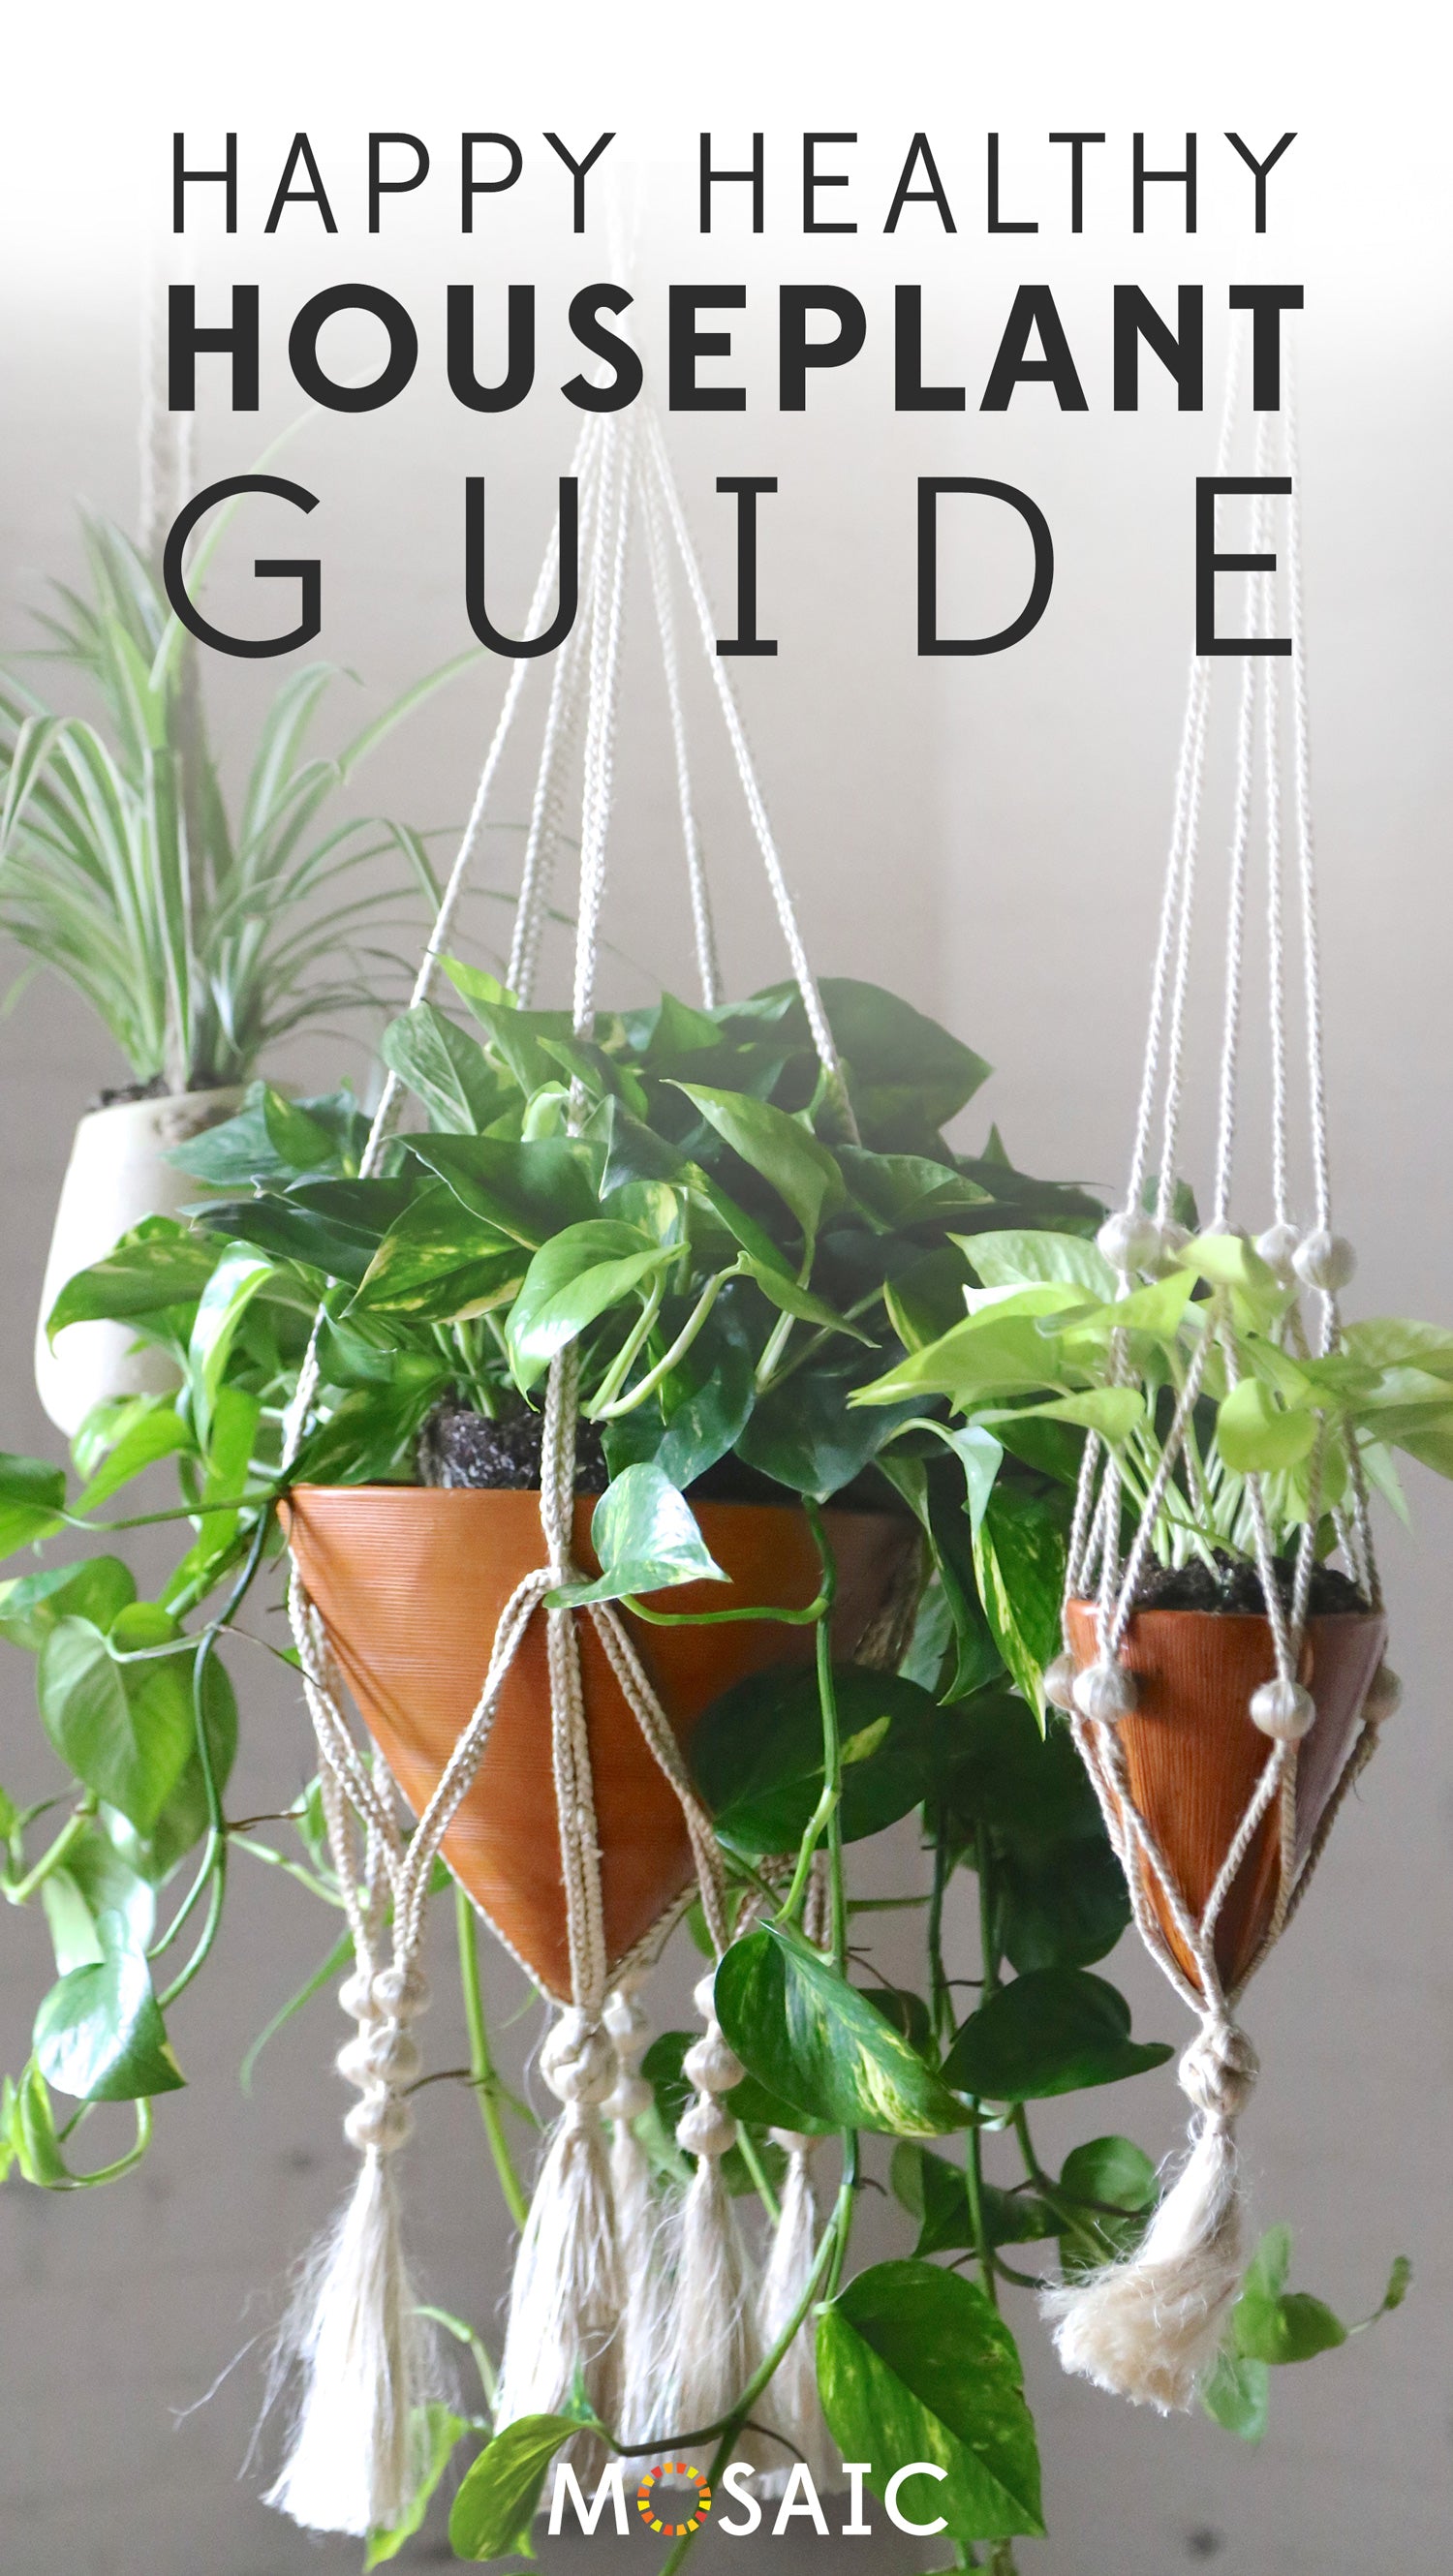 Snake Plant | Fair Trade Planter from Ten Thousand Villages — Your guide to happy healthy houseplants